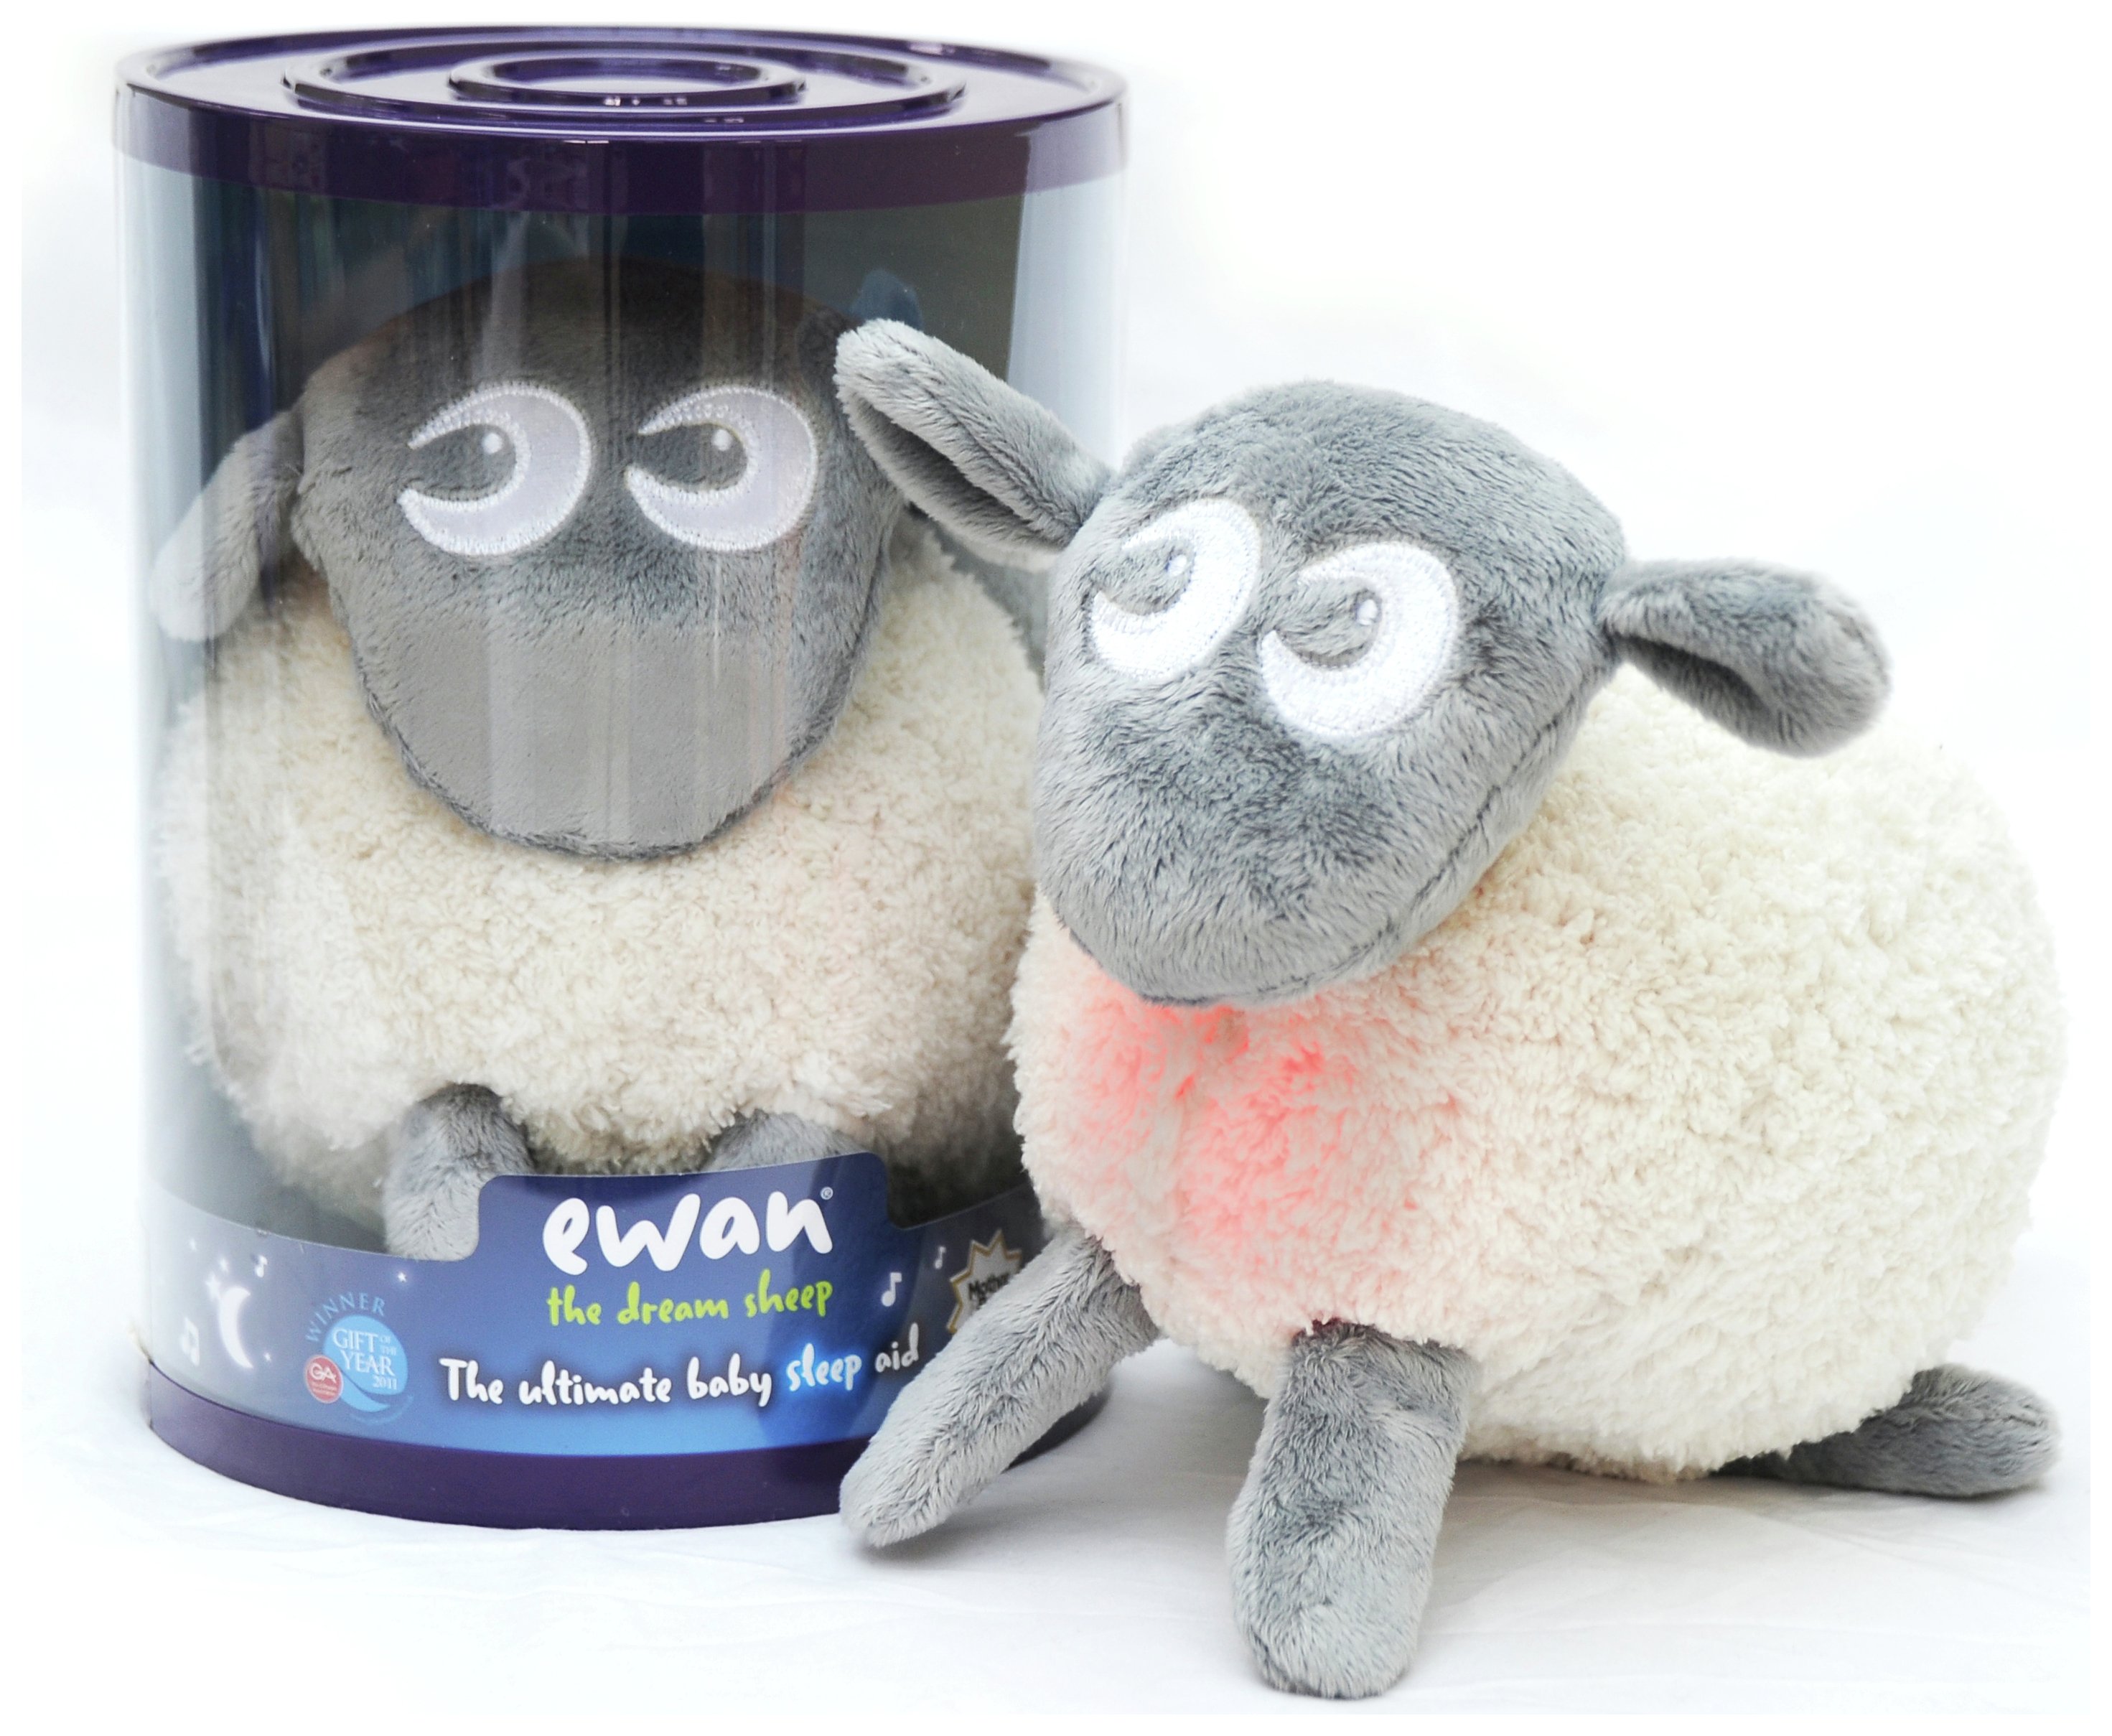 heartbeat sheep for baby